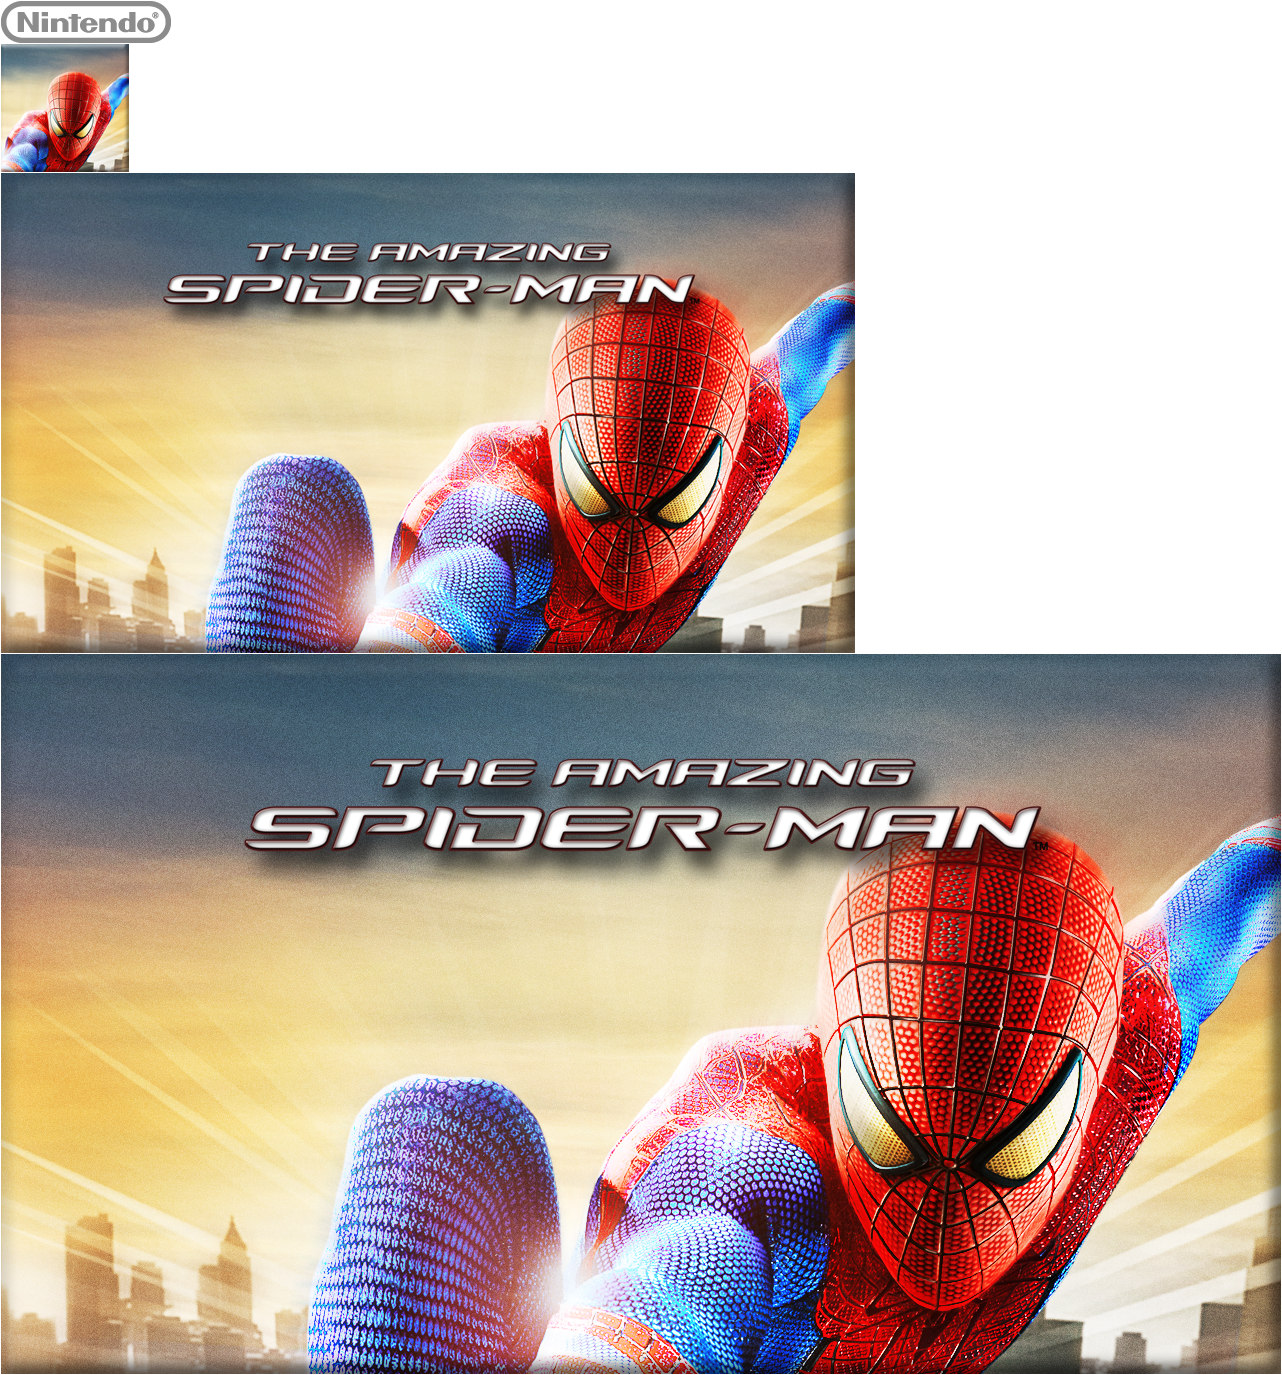 The Amazing Spider-Man - HOME Menu Icon & Banners